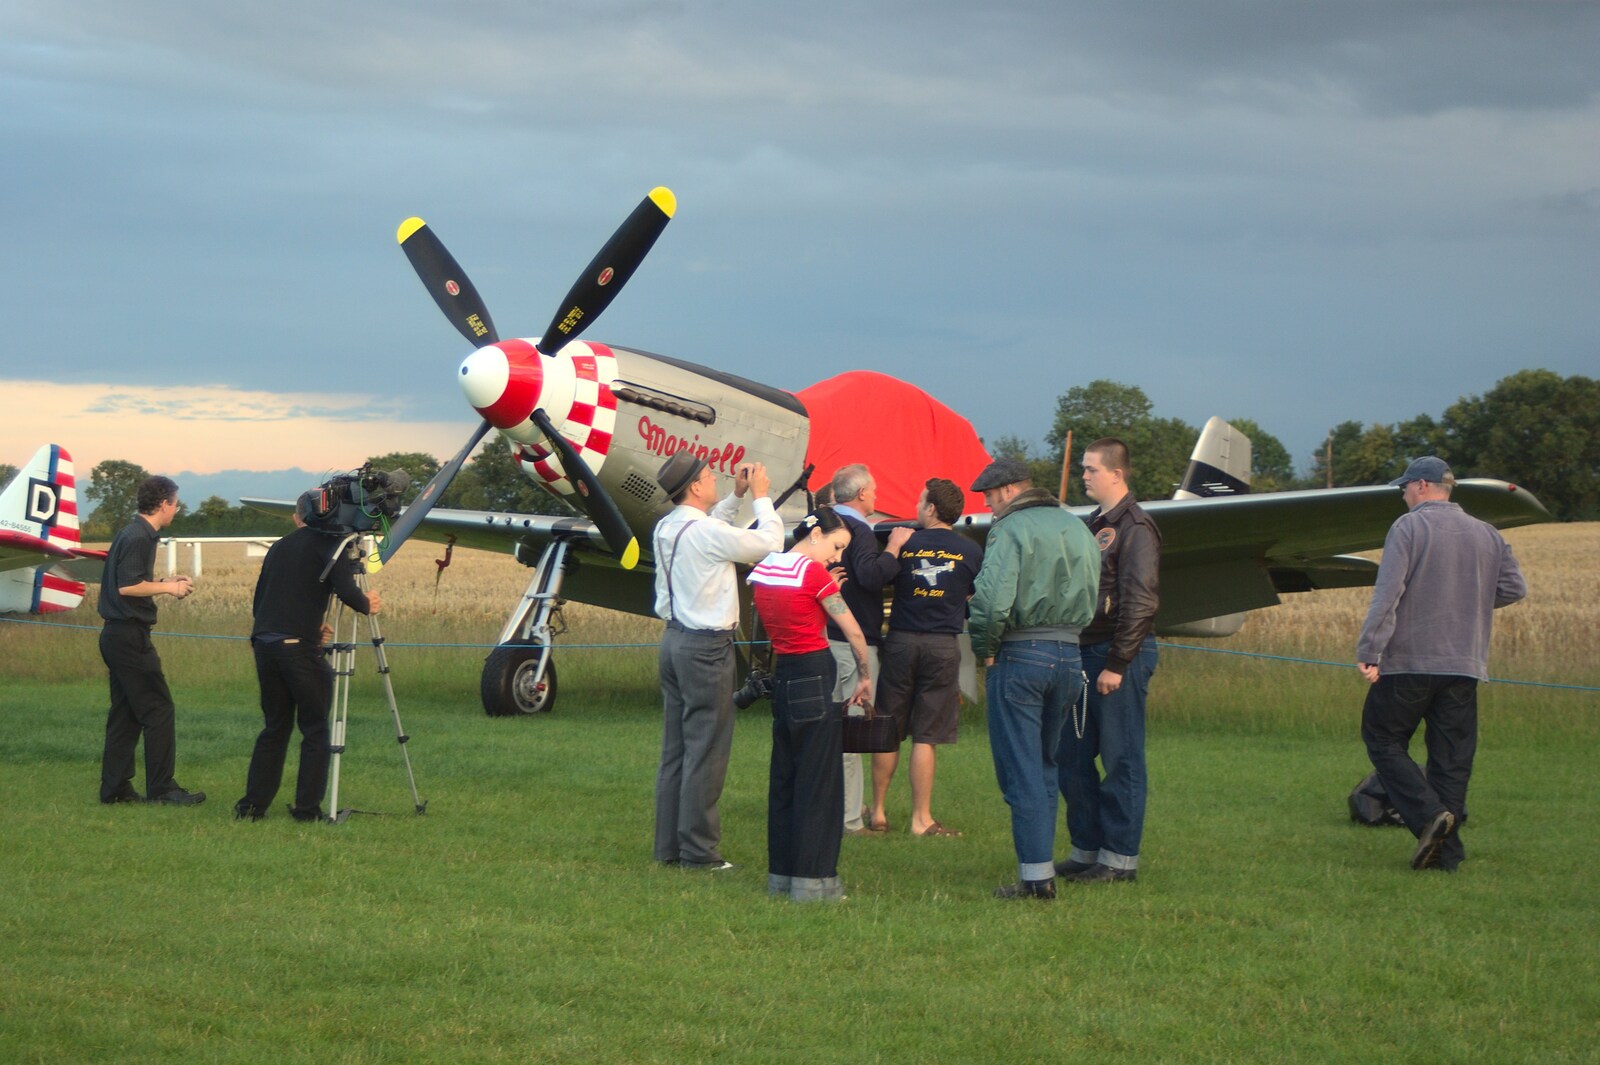 Mingling around Marinell for photos from Maurice's Mustang Hangar Dance, Hardwick Airfield, Norfolk - 16th July 2011